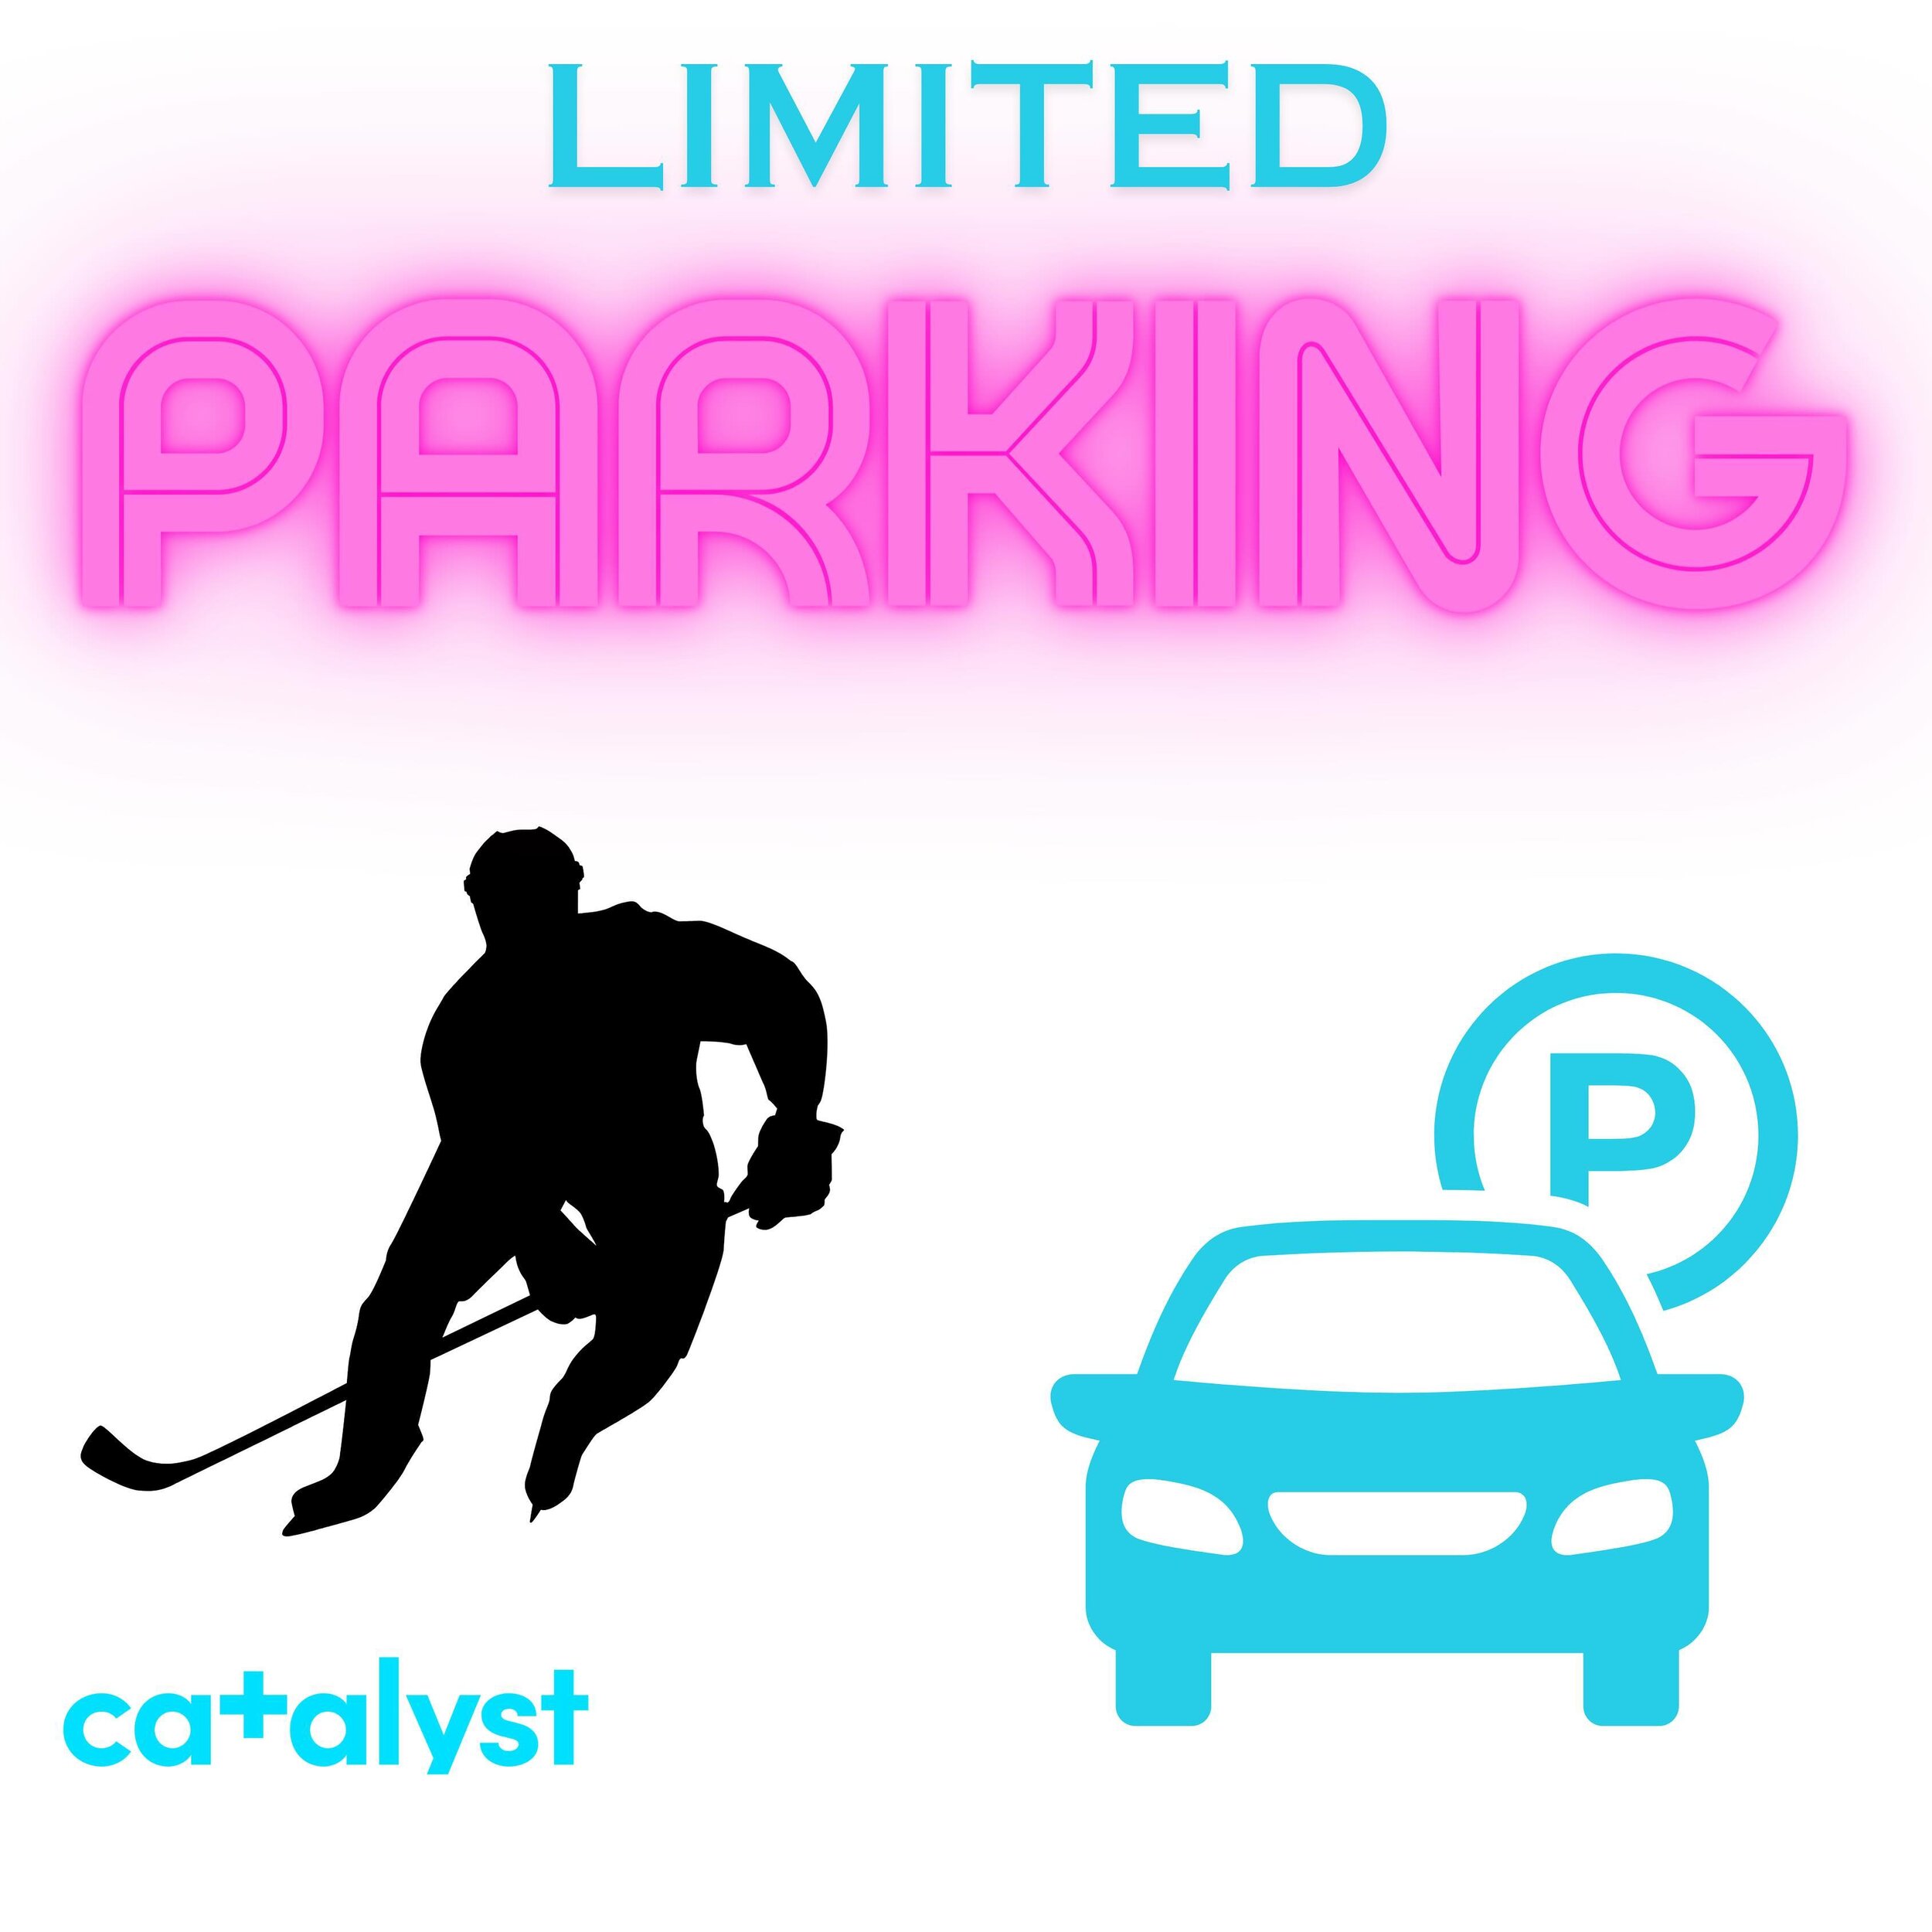 PARKING ALERT

There is a big hockey tournament going on across the street from the Sante Centre Wednesday April 3rd until Sunday April 7th. 

Because of this, parking may be a bit more challenging for our clients. Please leave a few extra minutes to